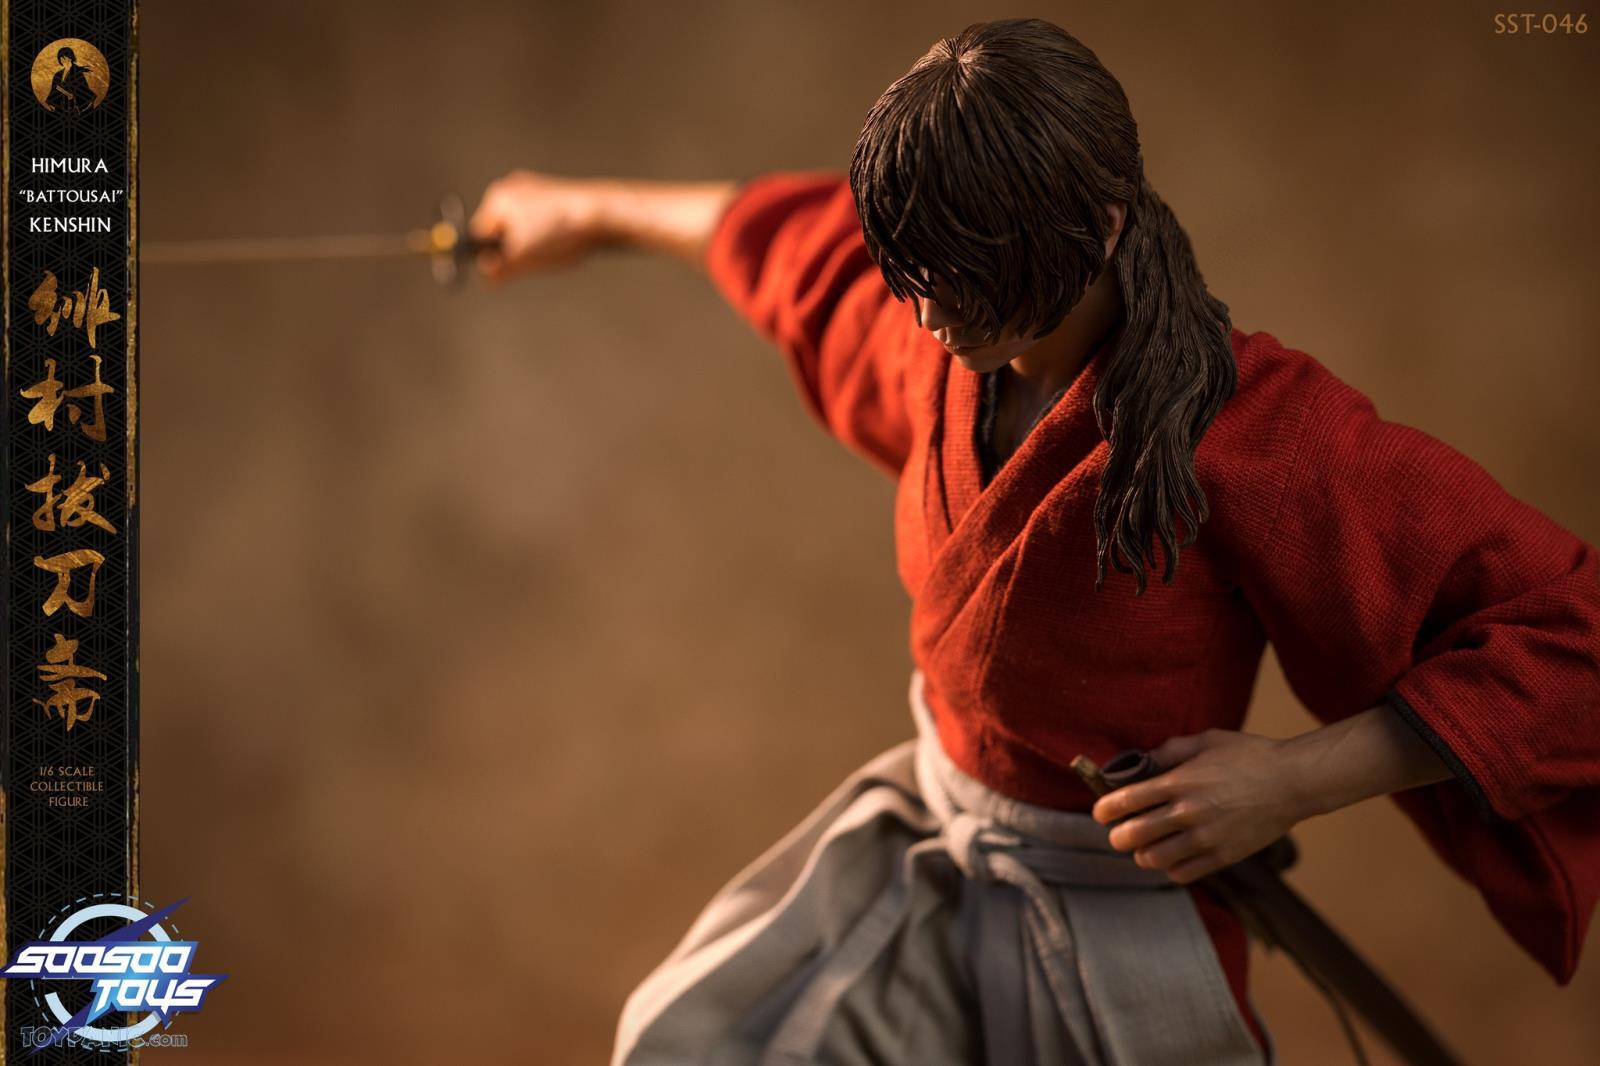 NEW PRODUCT: 1/6 scale Rurouni Kenshin Collectible Figure from SooSooToys 712202251229PM_9557183